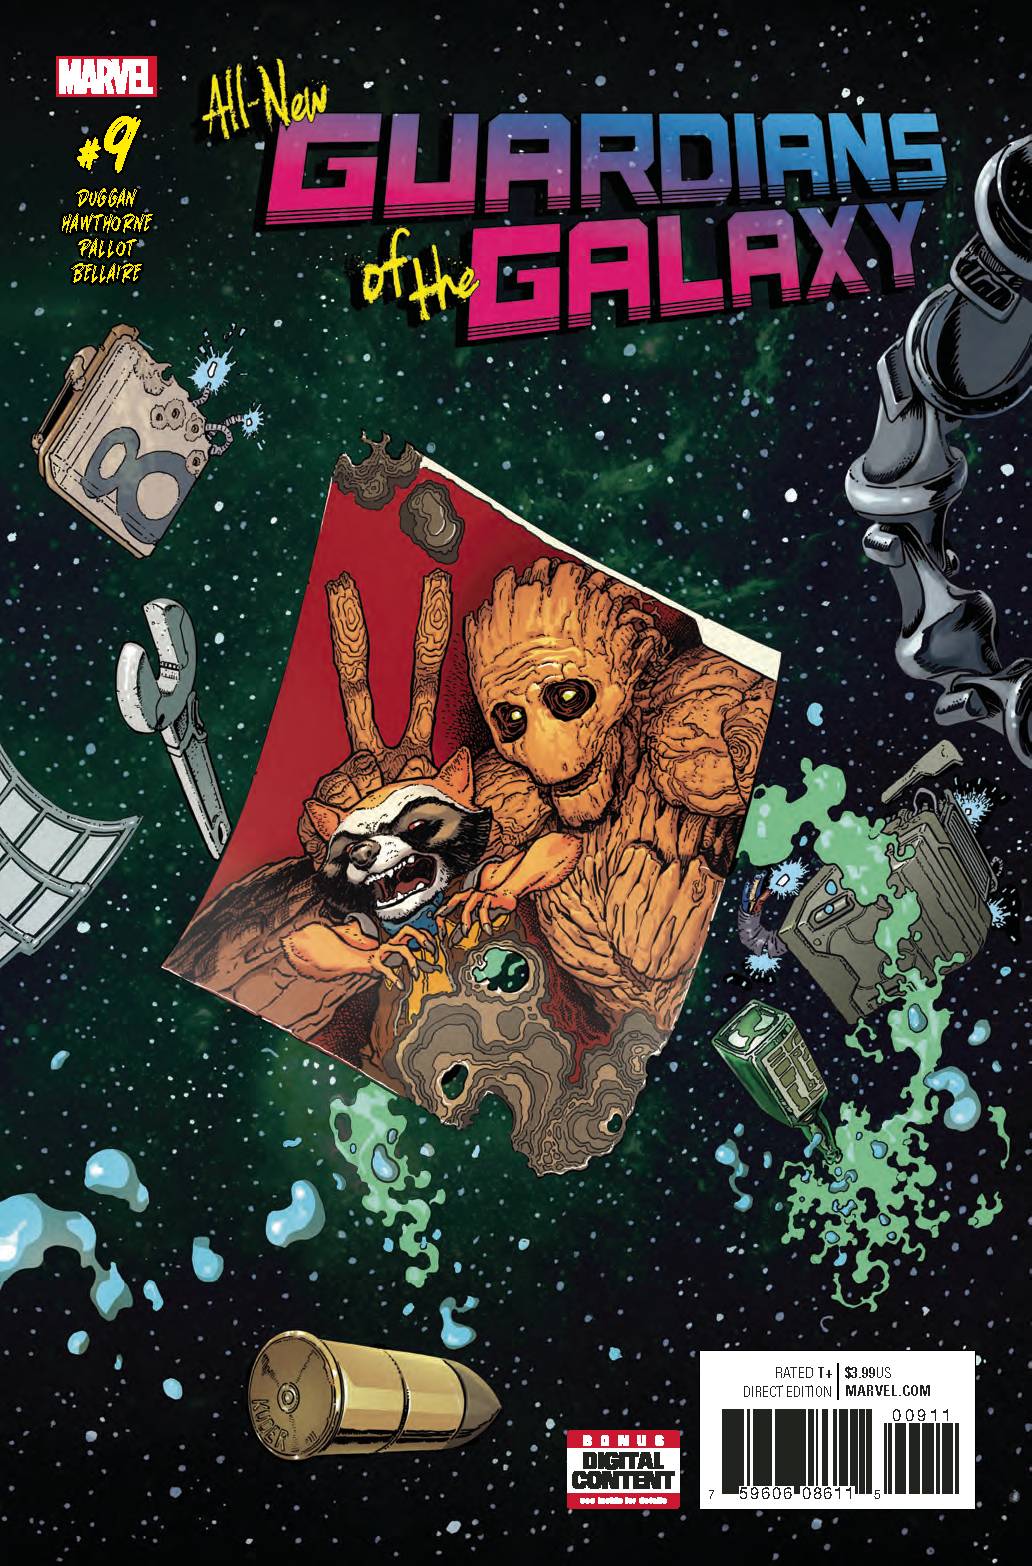 All New Guardians of Galaxy #9 (2017)